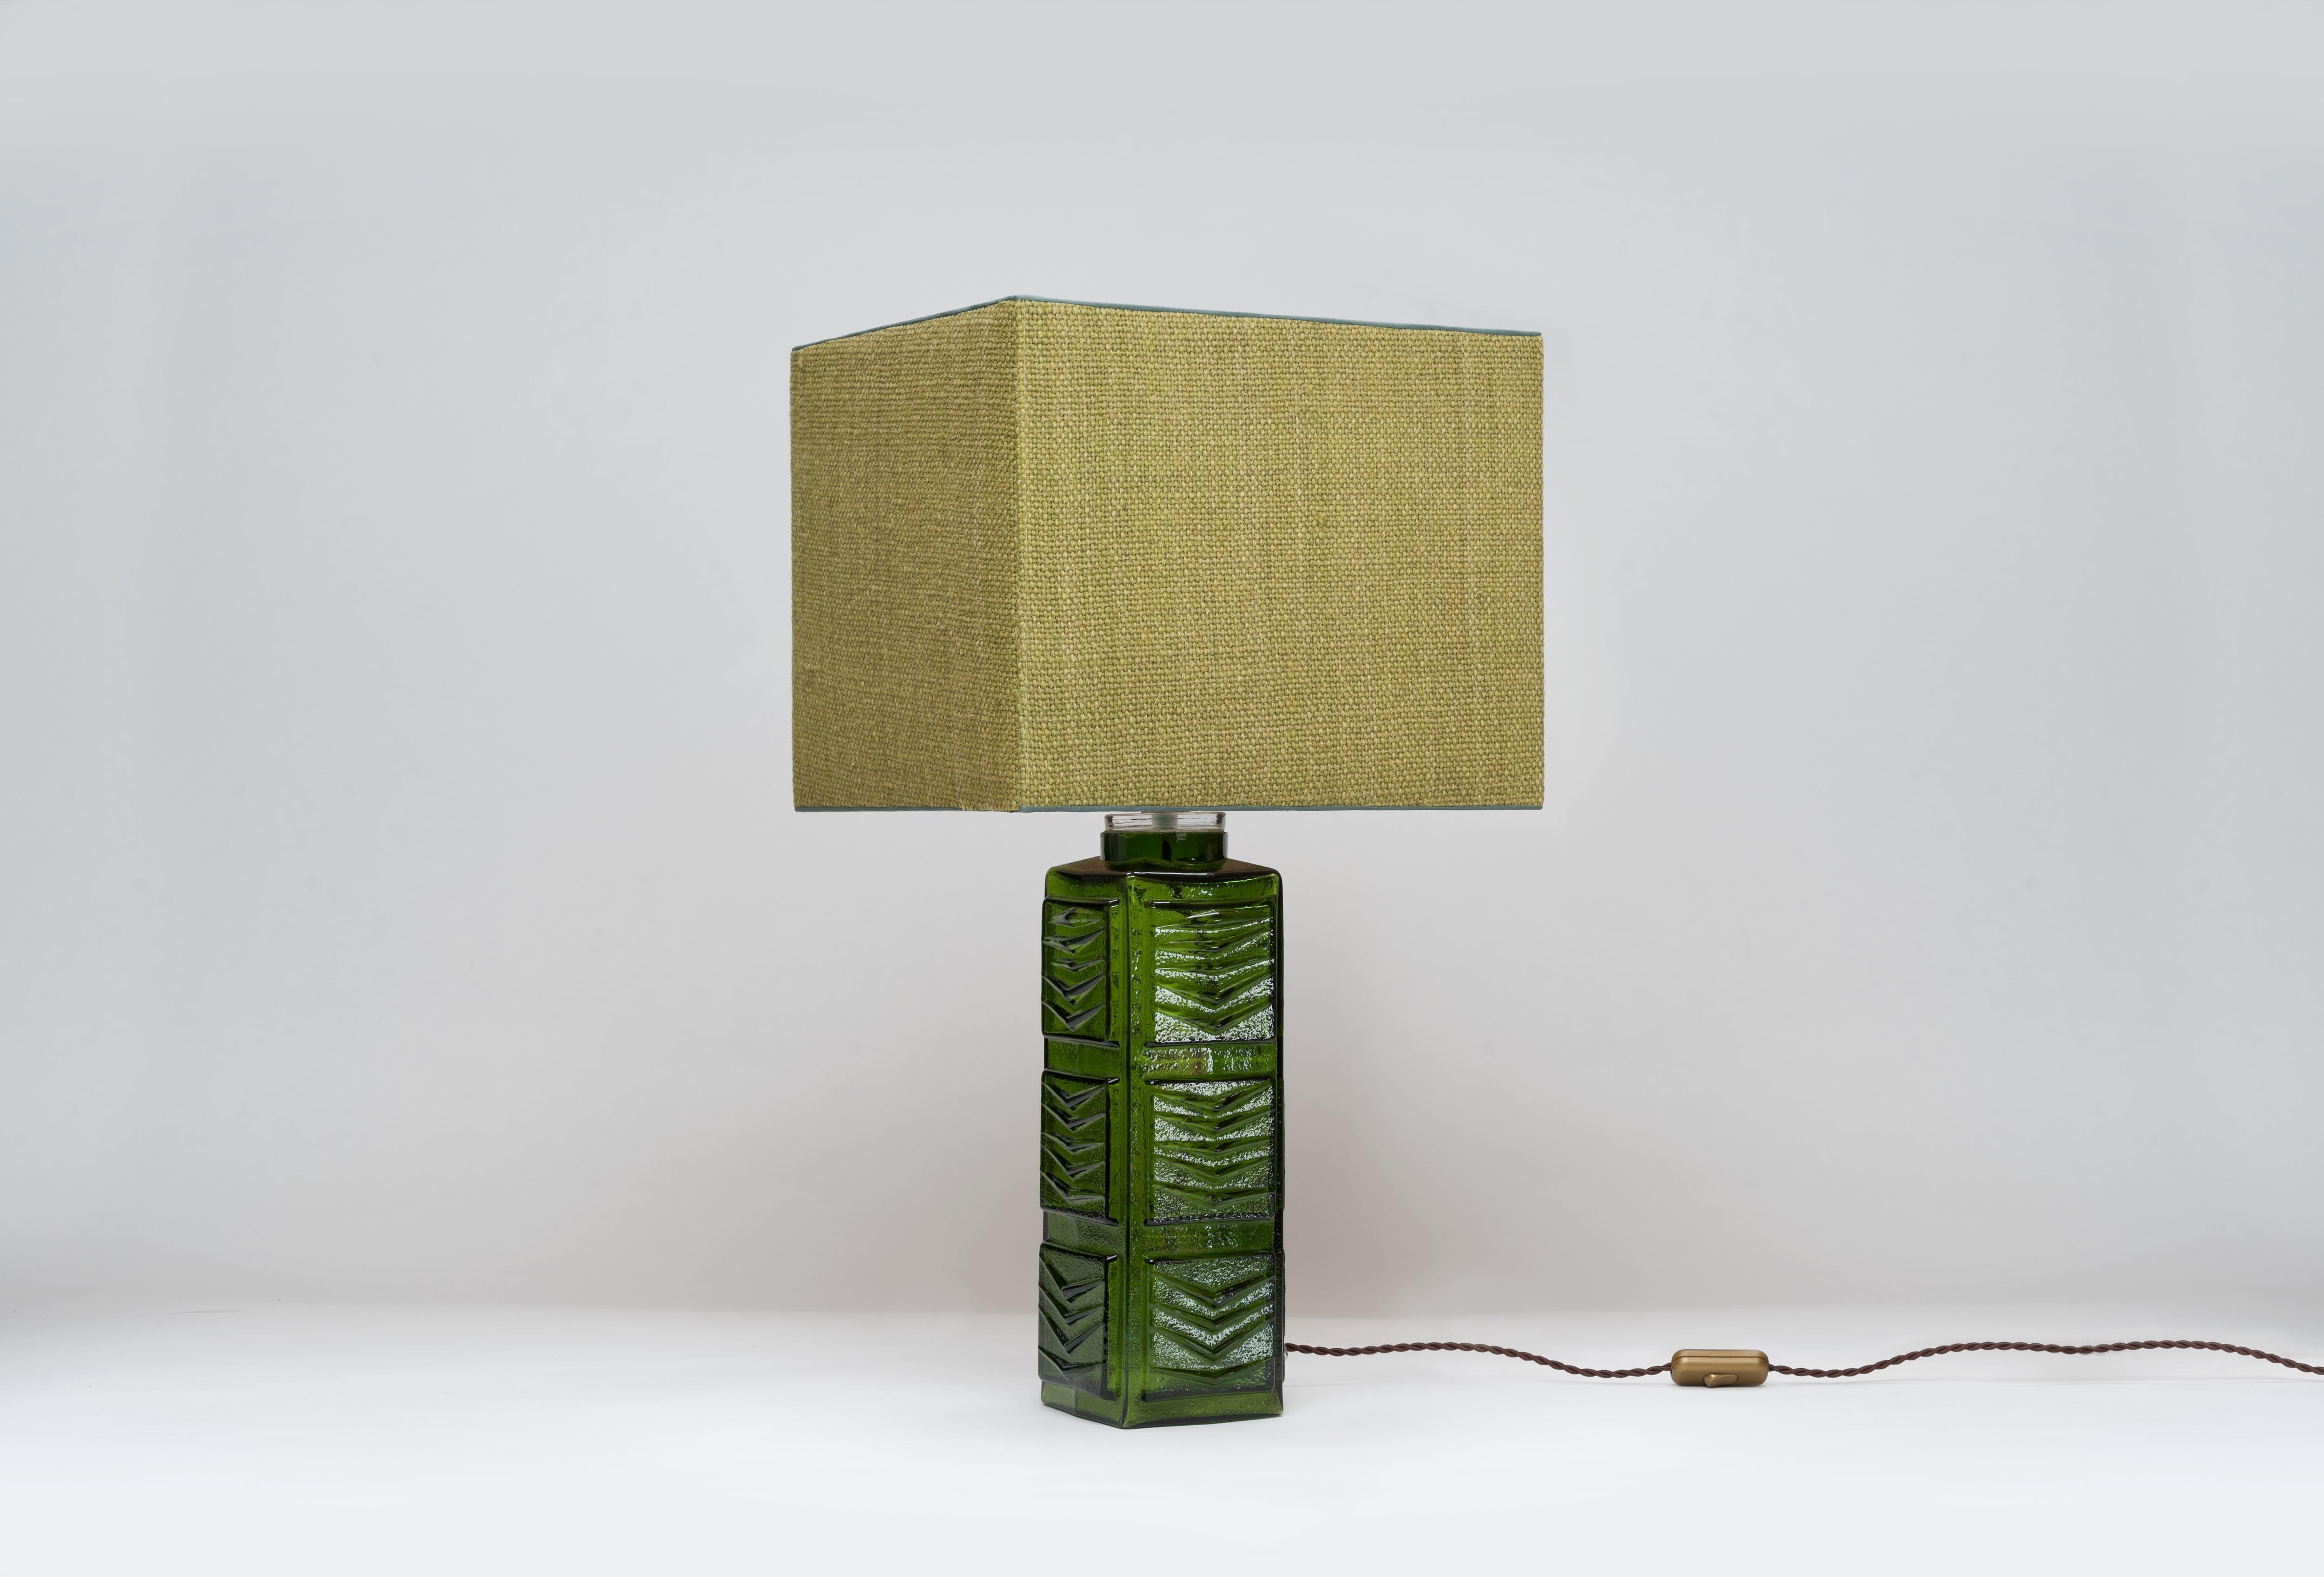 Vintage Swedish glass table lamp from 1970 with abstract fern motif. Most likely made at Gullaskruf Glasbruk in Sweden. 
The shade is handmade for the lamp in a unique shape and made of a beautiful coarse green linen quality fabric. The shade has a